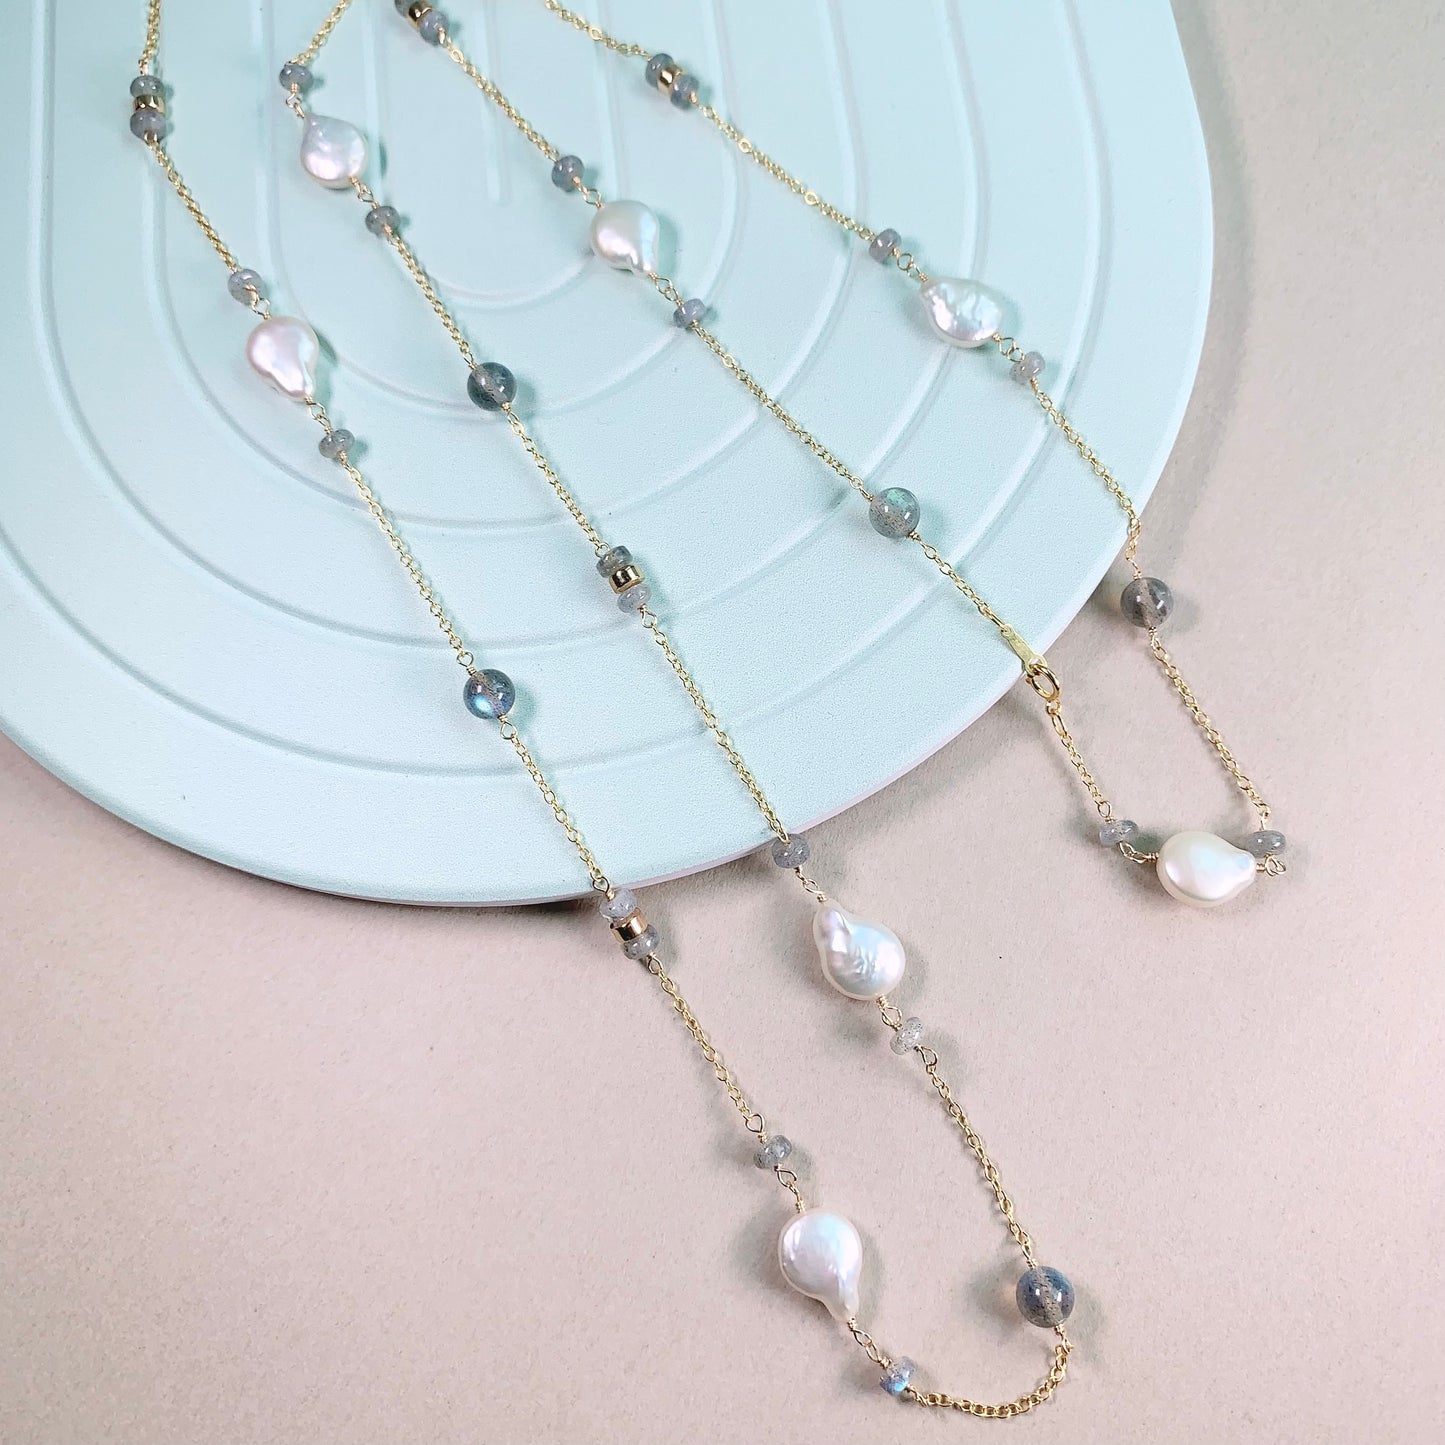 Labradorite and Pearl Long Necklace 36"